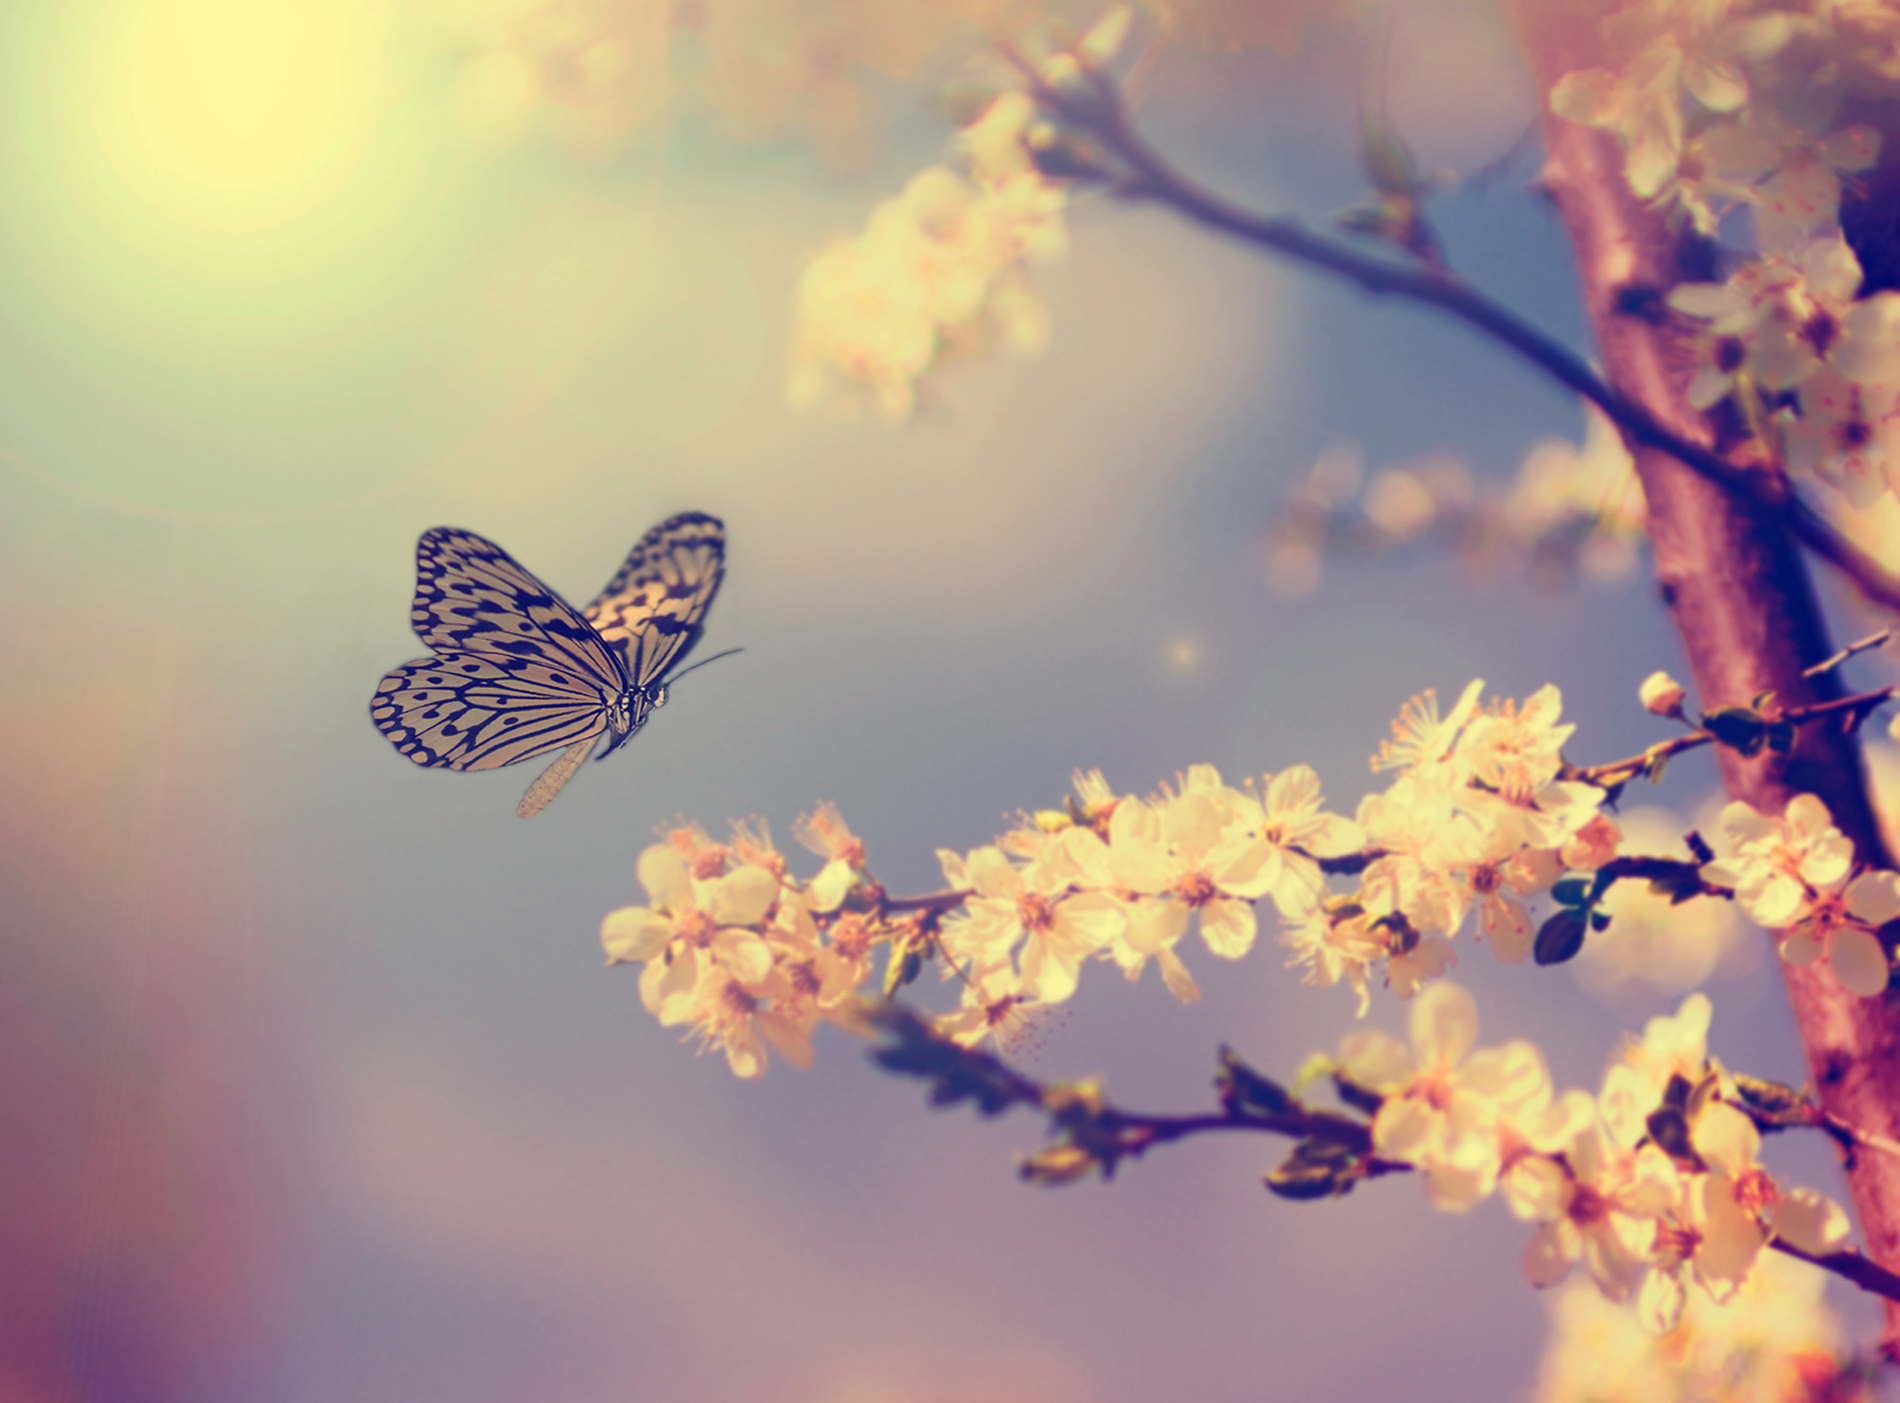 Butterflies And Blooming Cherry Blossoms - HD Wallpaper 